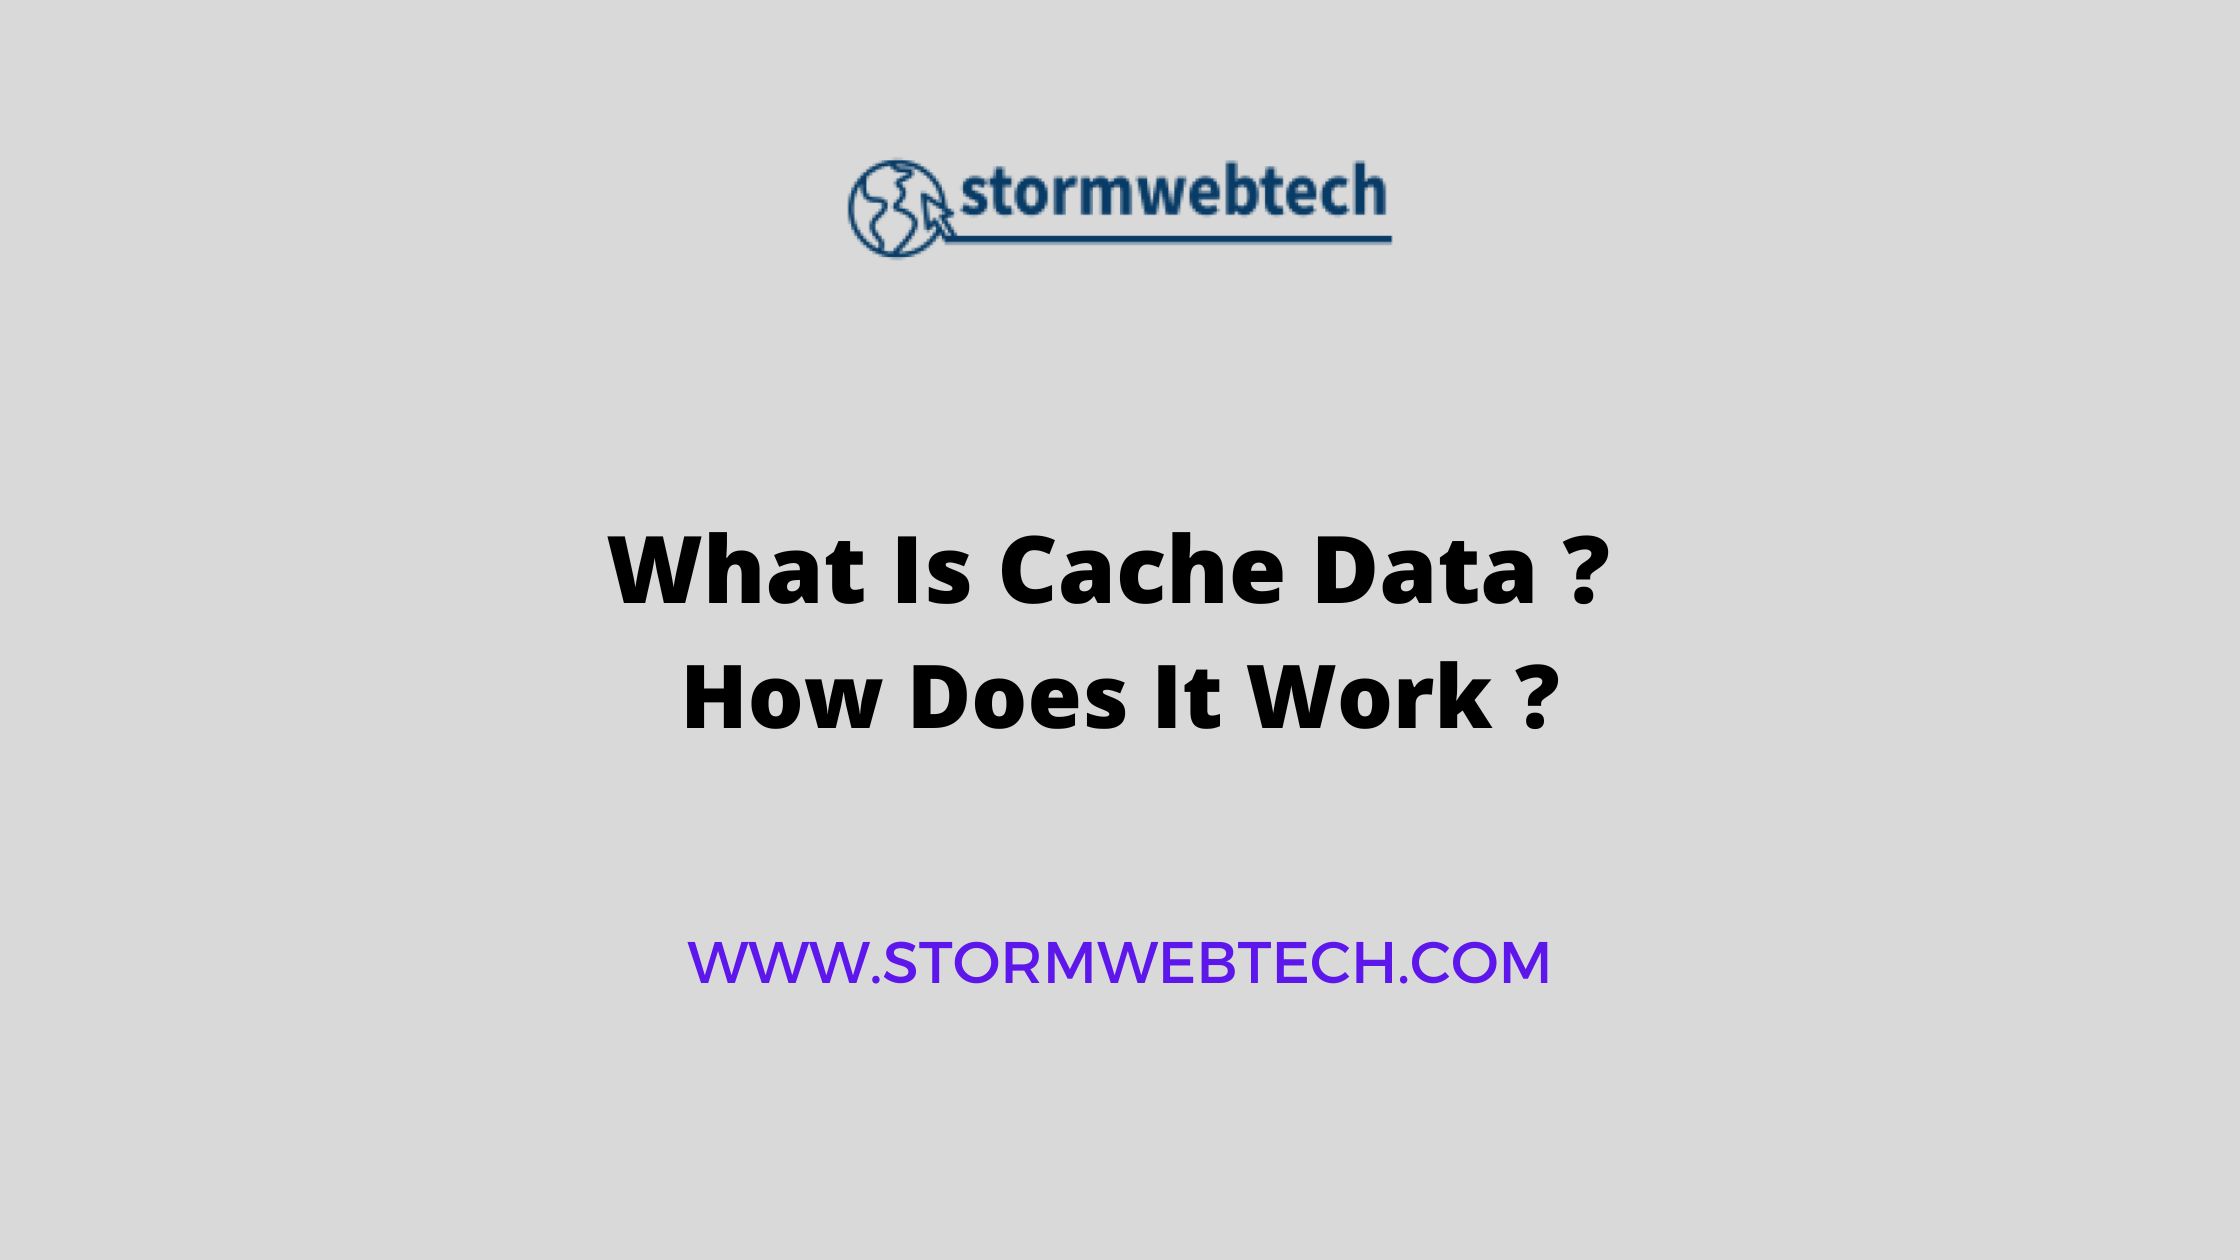 What Is Cache Data, How Does It Work, Cache data refers to temporary files and data that are stored on a device to help speed up its performance